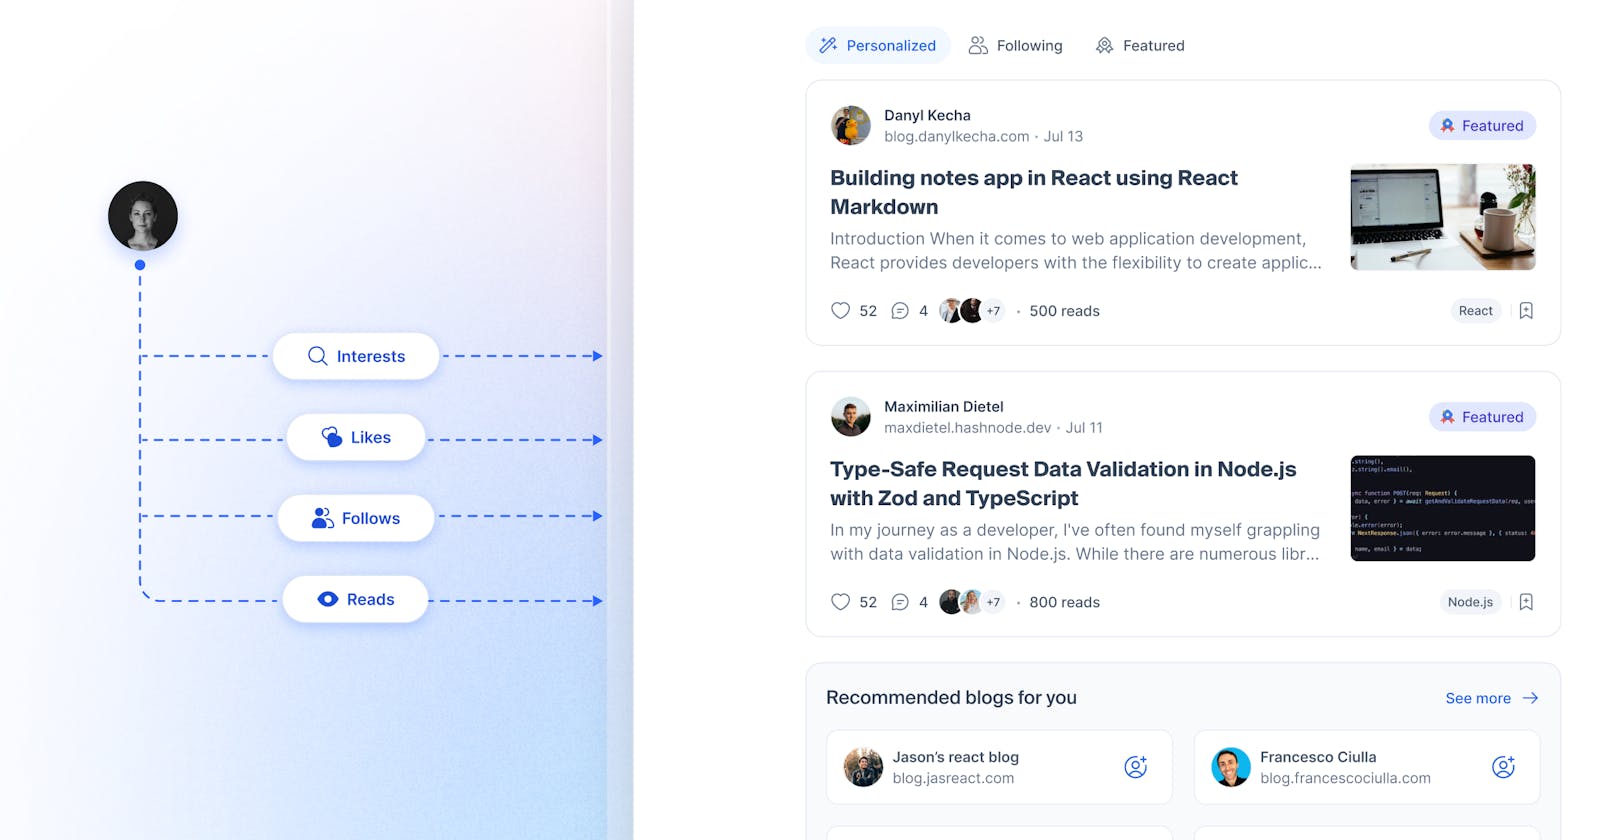 The art of feed curating: Our approach to generating personalized feeds that match users' interests